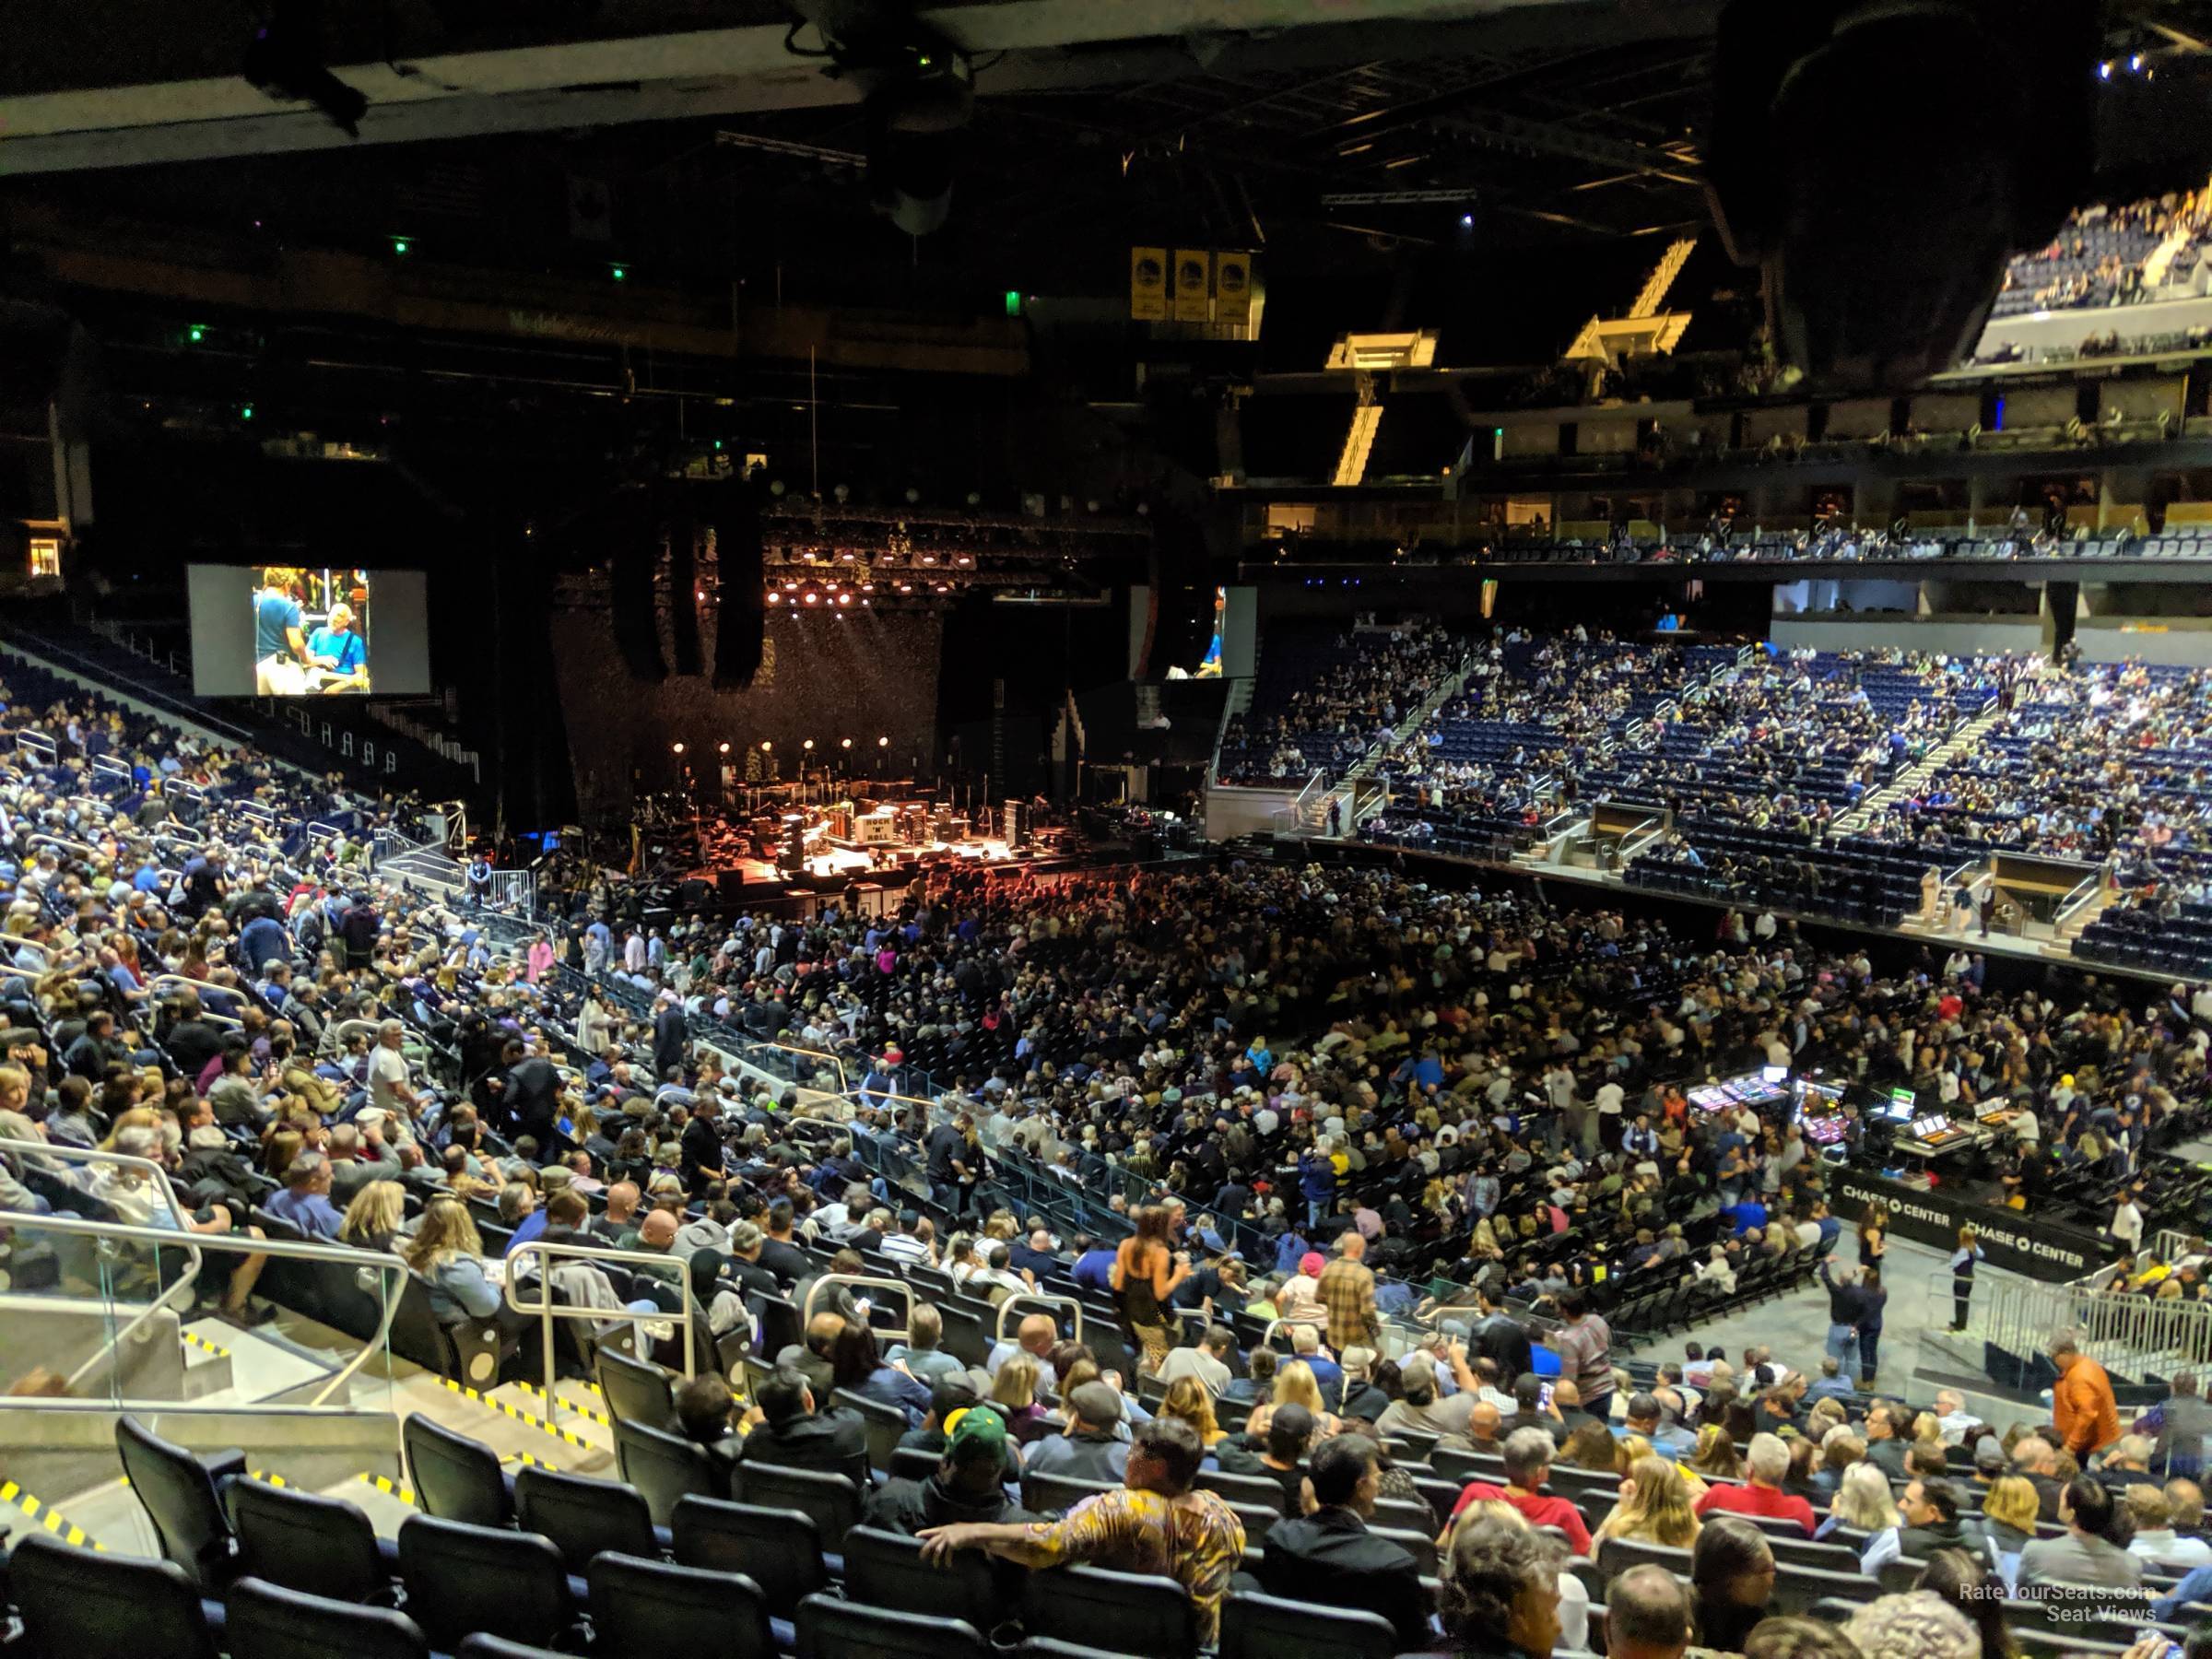 Section 113 at Chase Center for Concerts